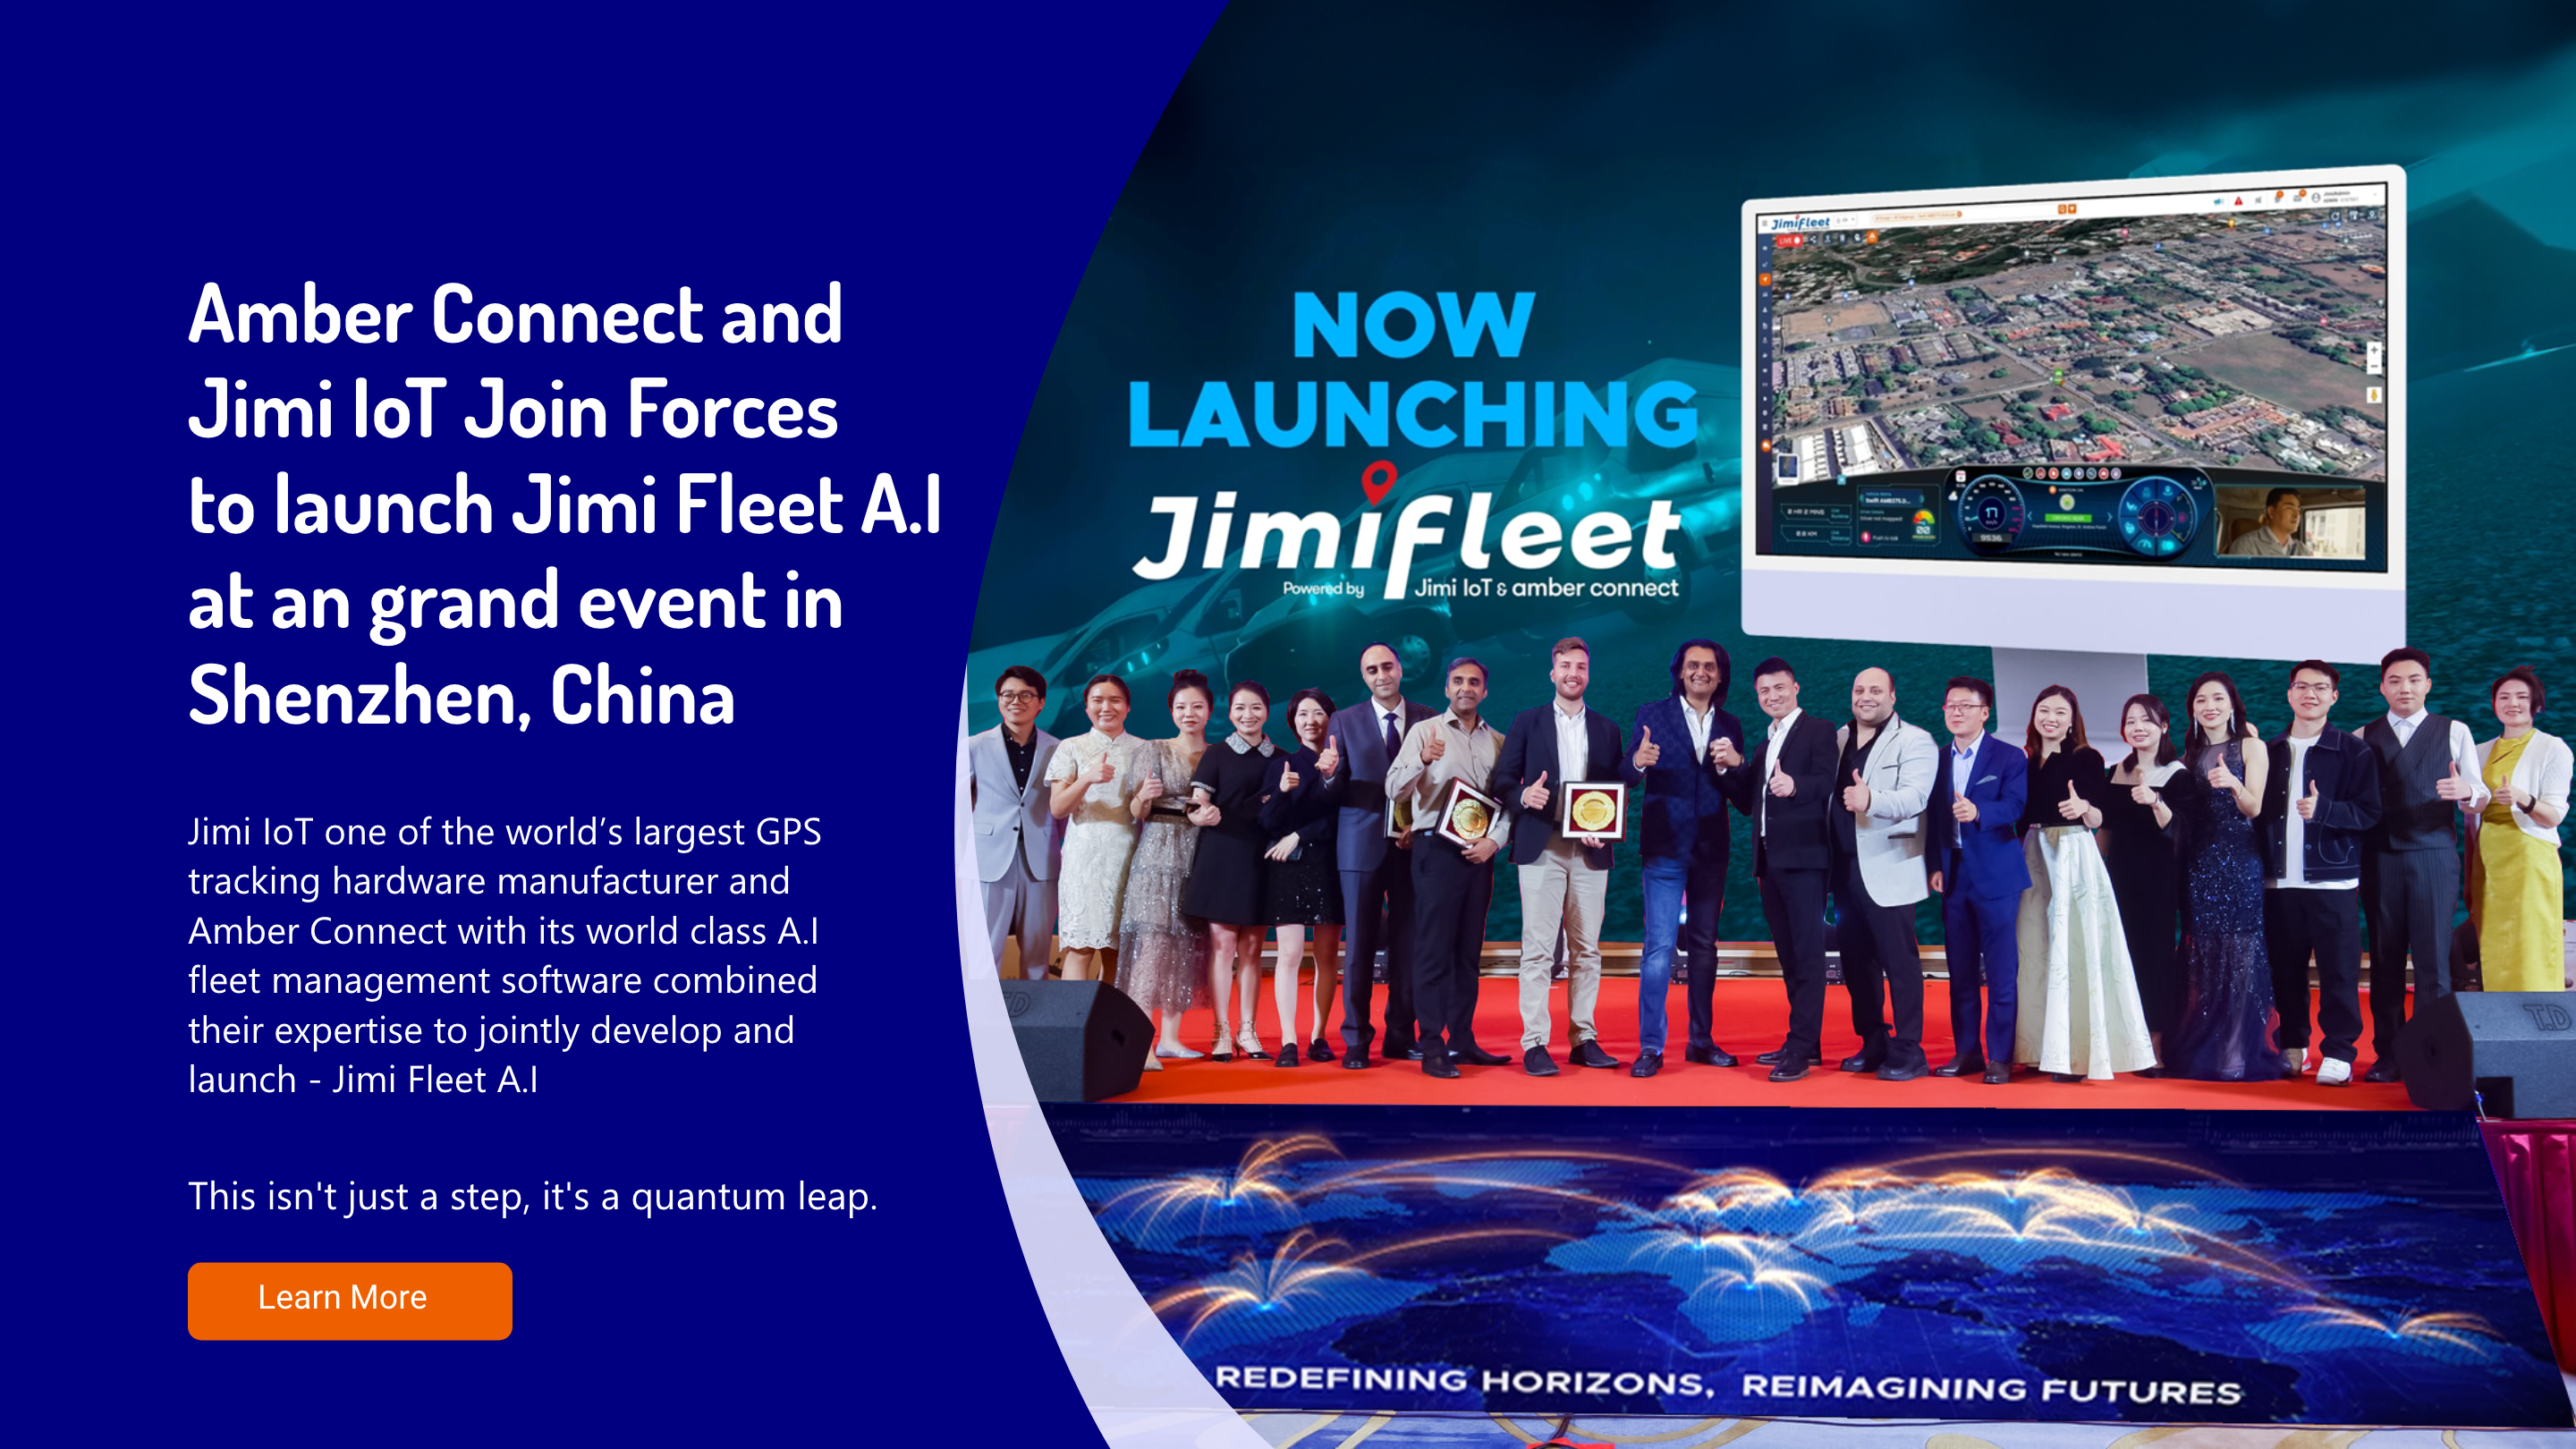 Amber Connect and Jimi IoT Join Forces to launch Jimi Fleet A.I at an grand event in Shenzhen, China